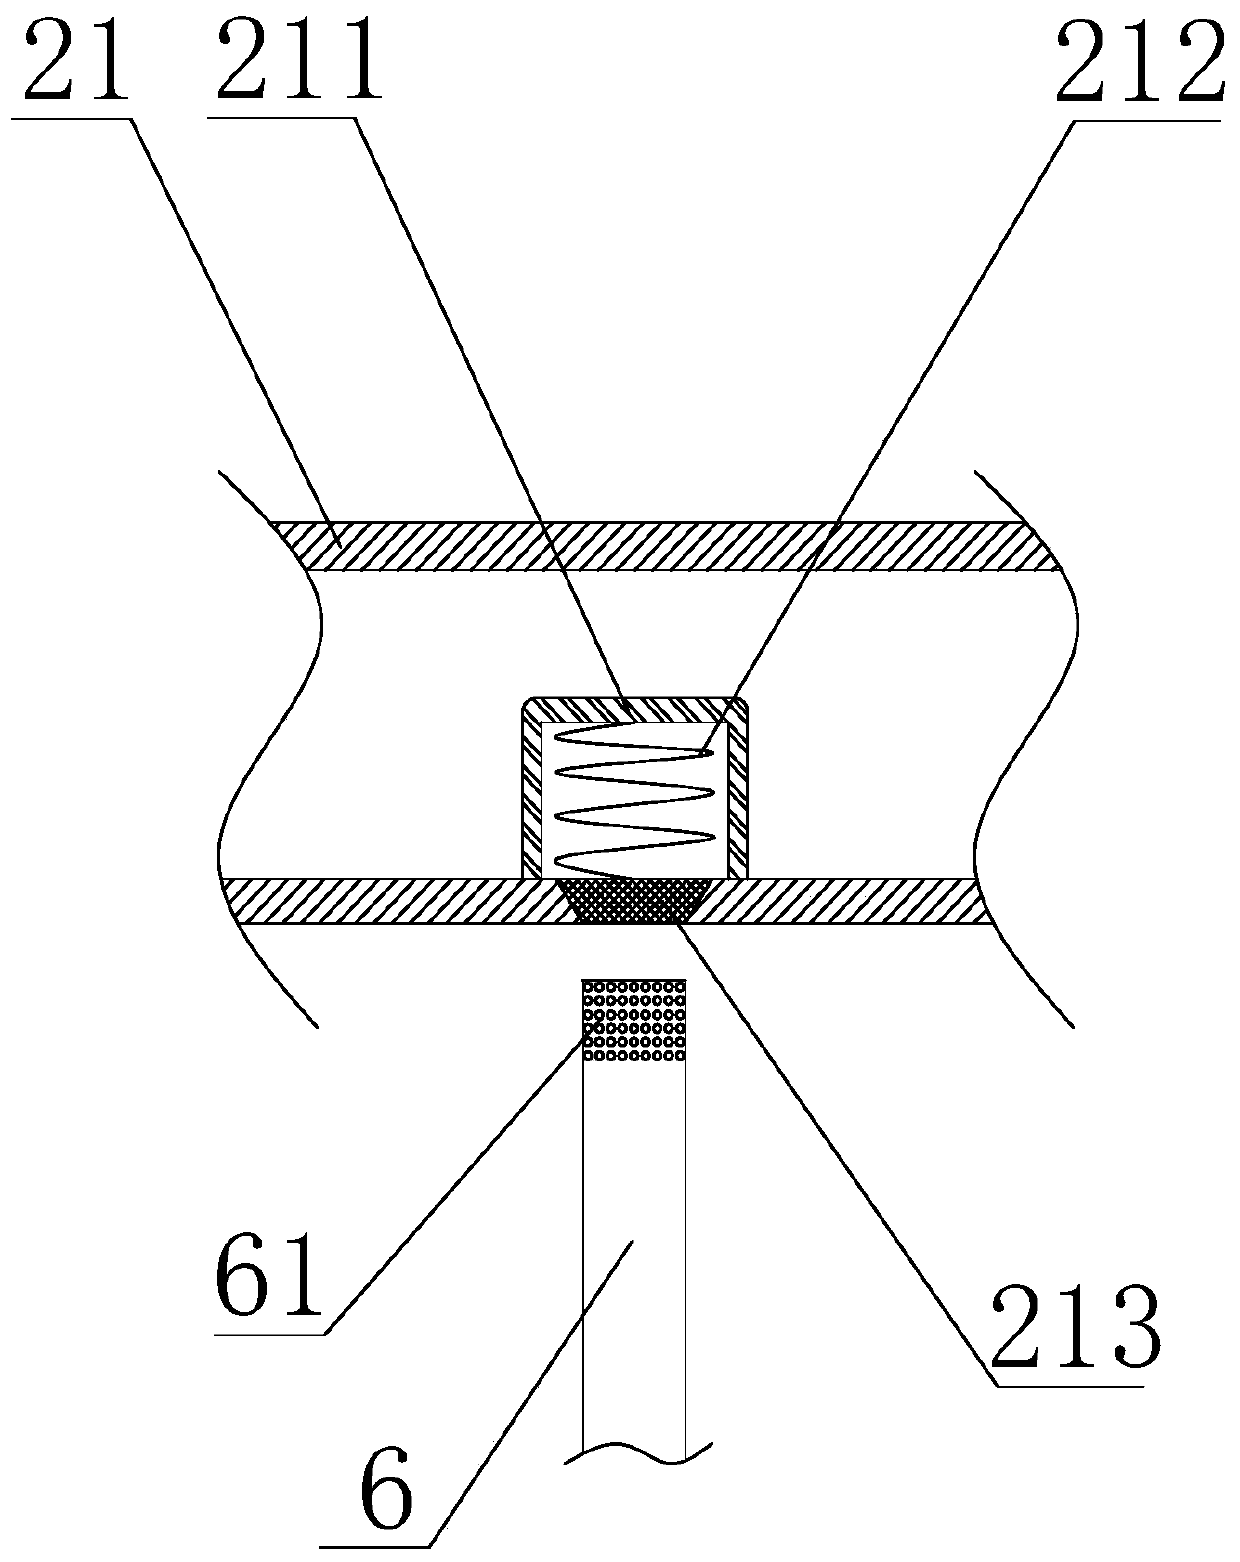 Intelligent suspending type carrying system applied to indoor